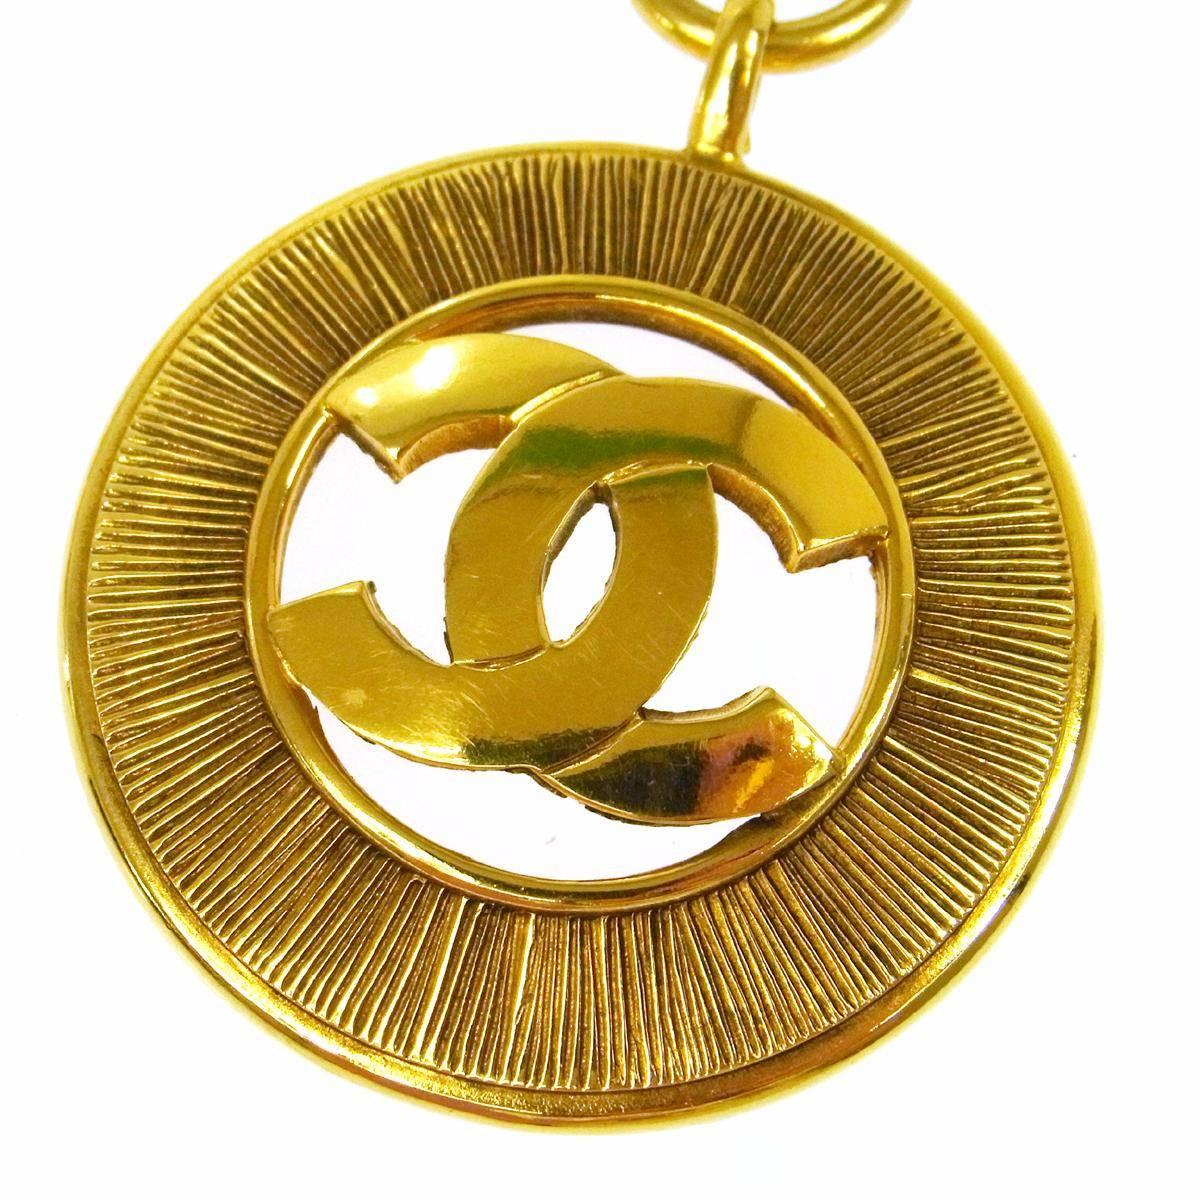 CURATOR'S NOTES

Brass
Gold tone hardware
Lobster claw closure
Made in France
Charm diameter 2